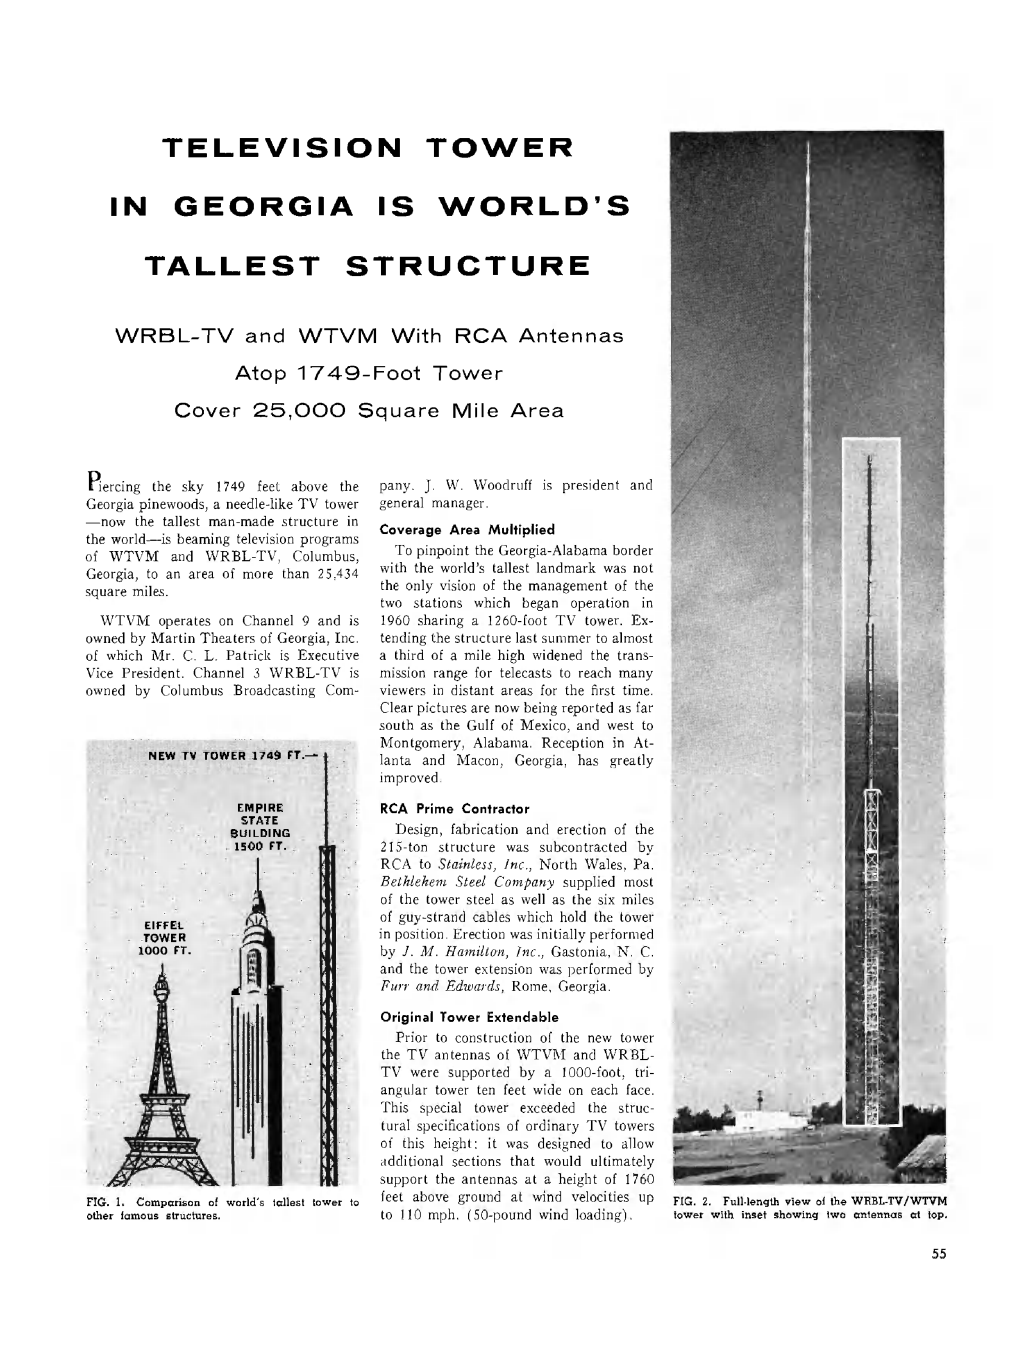 Television Tower in Georgia Is World's Tallest Structure